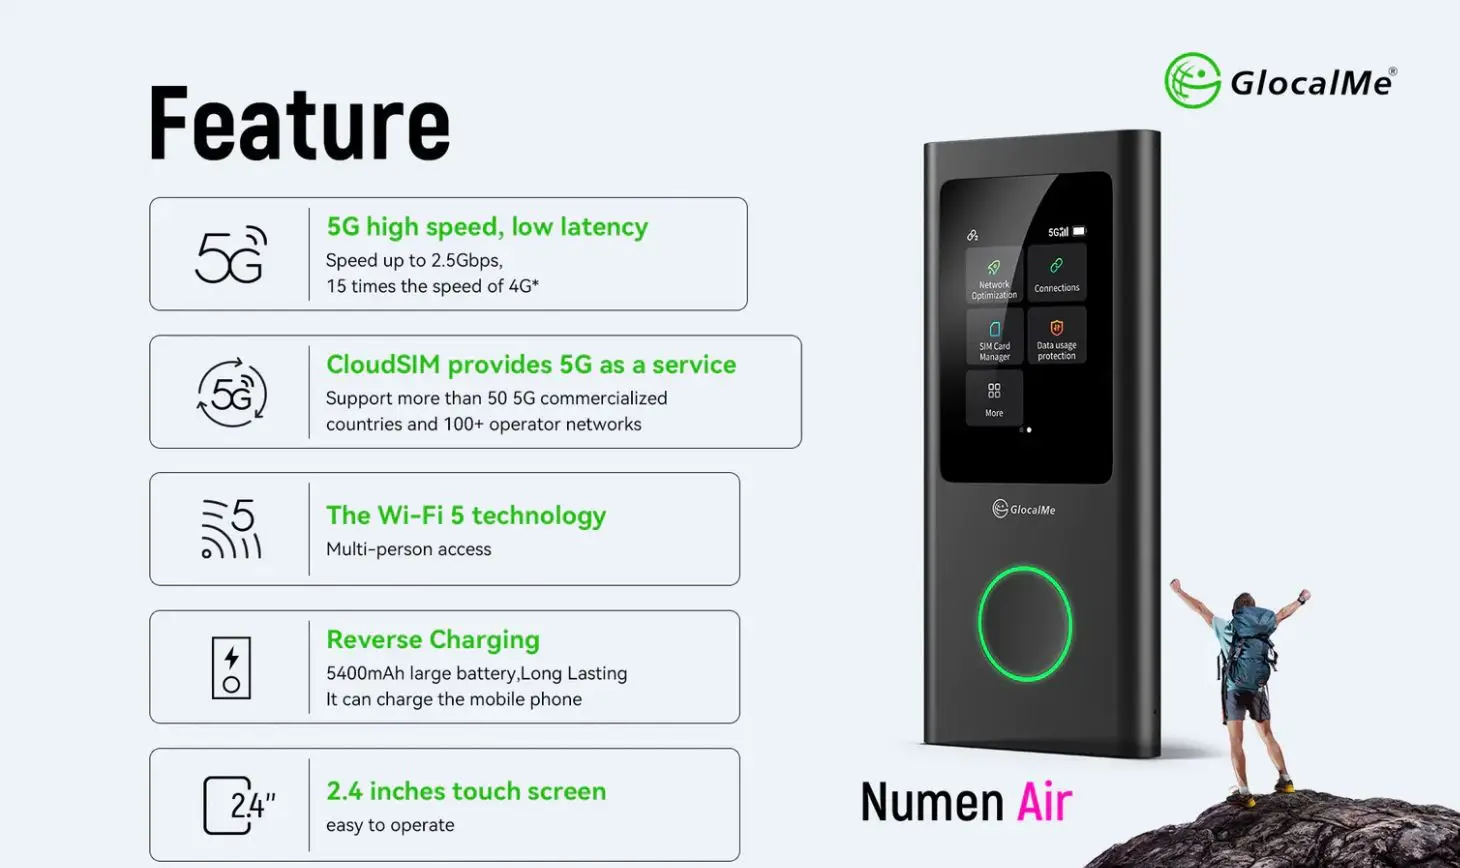 GlocalMe U50 Numen Air 5G Global Frequency Portable WiFI support 120+ country data no roaming